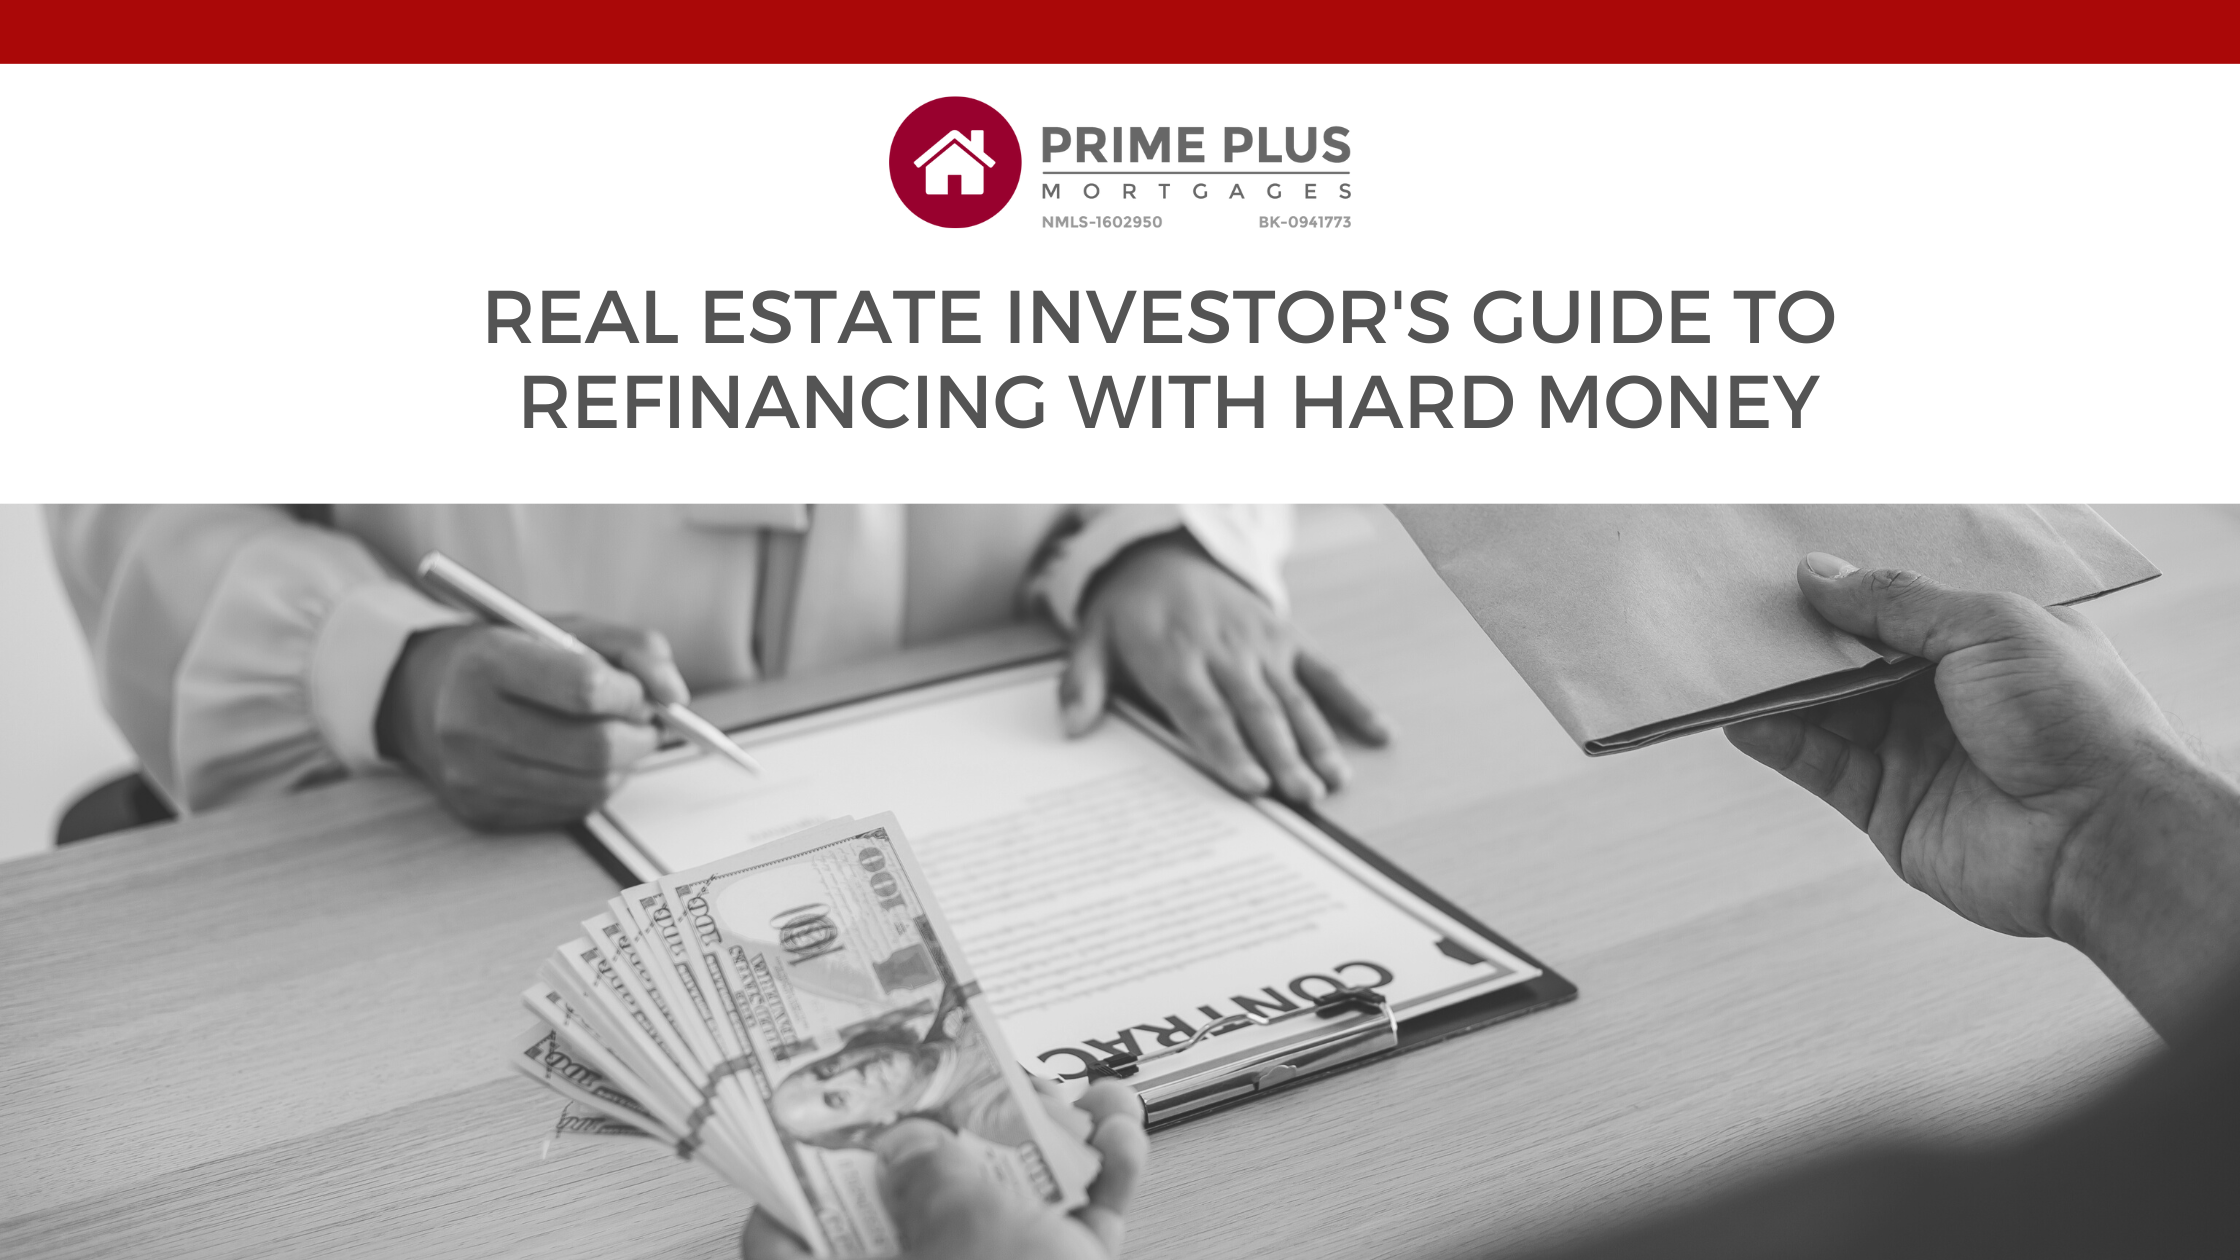 Real Estate Investor's Guide to Refinancing with Hard Money